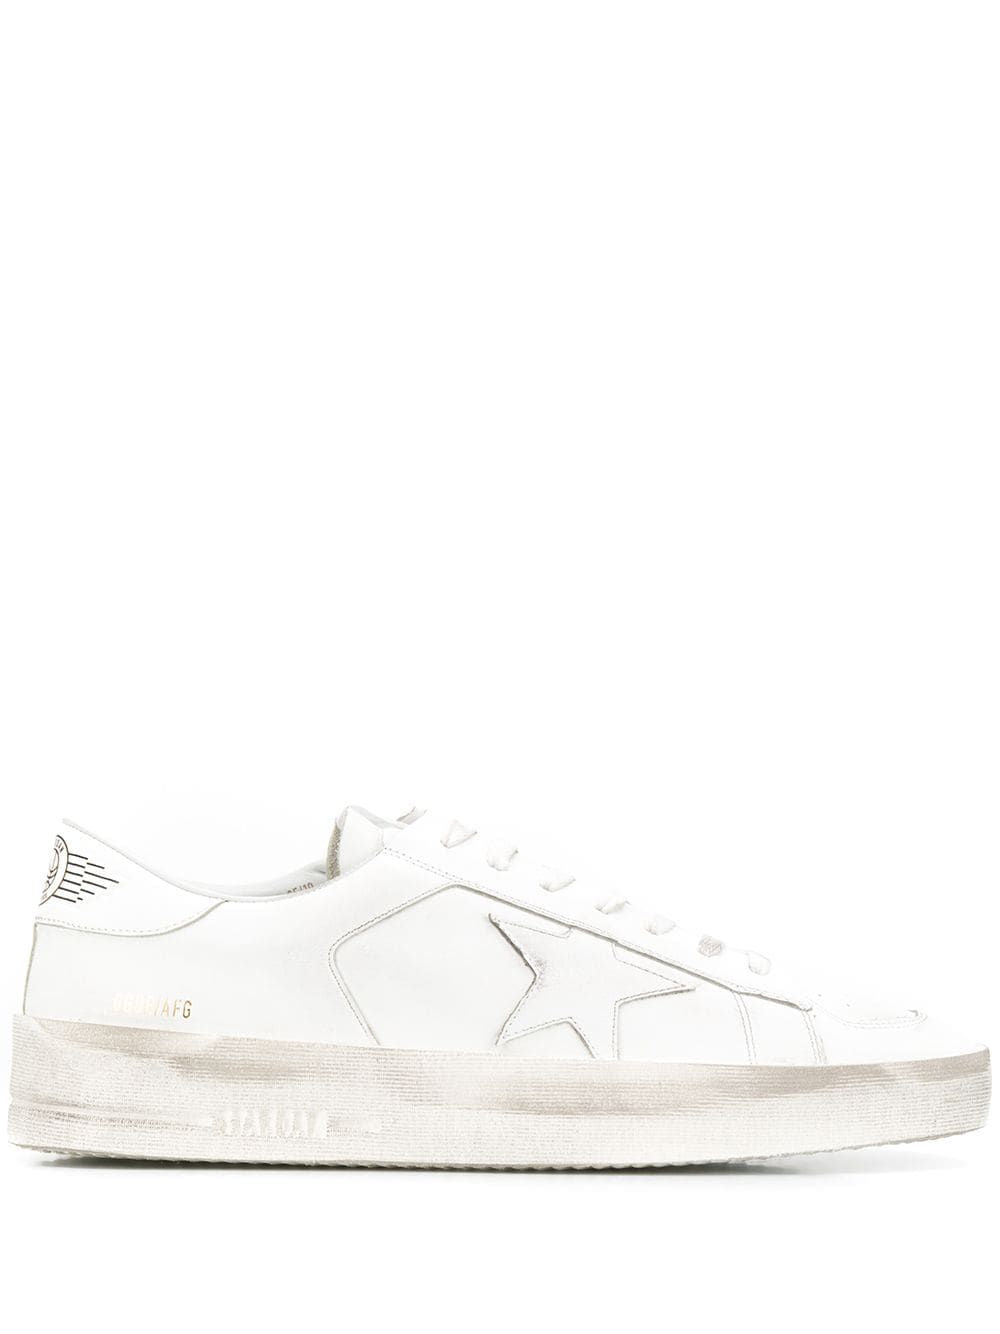 GOLDEN GOOSE Men's White Leather Stardan Sneakers for Everyday Style